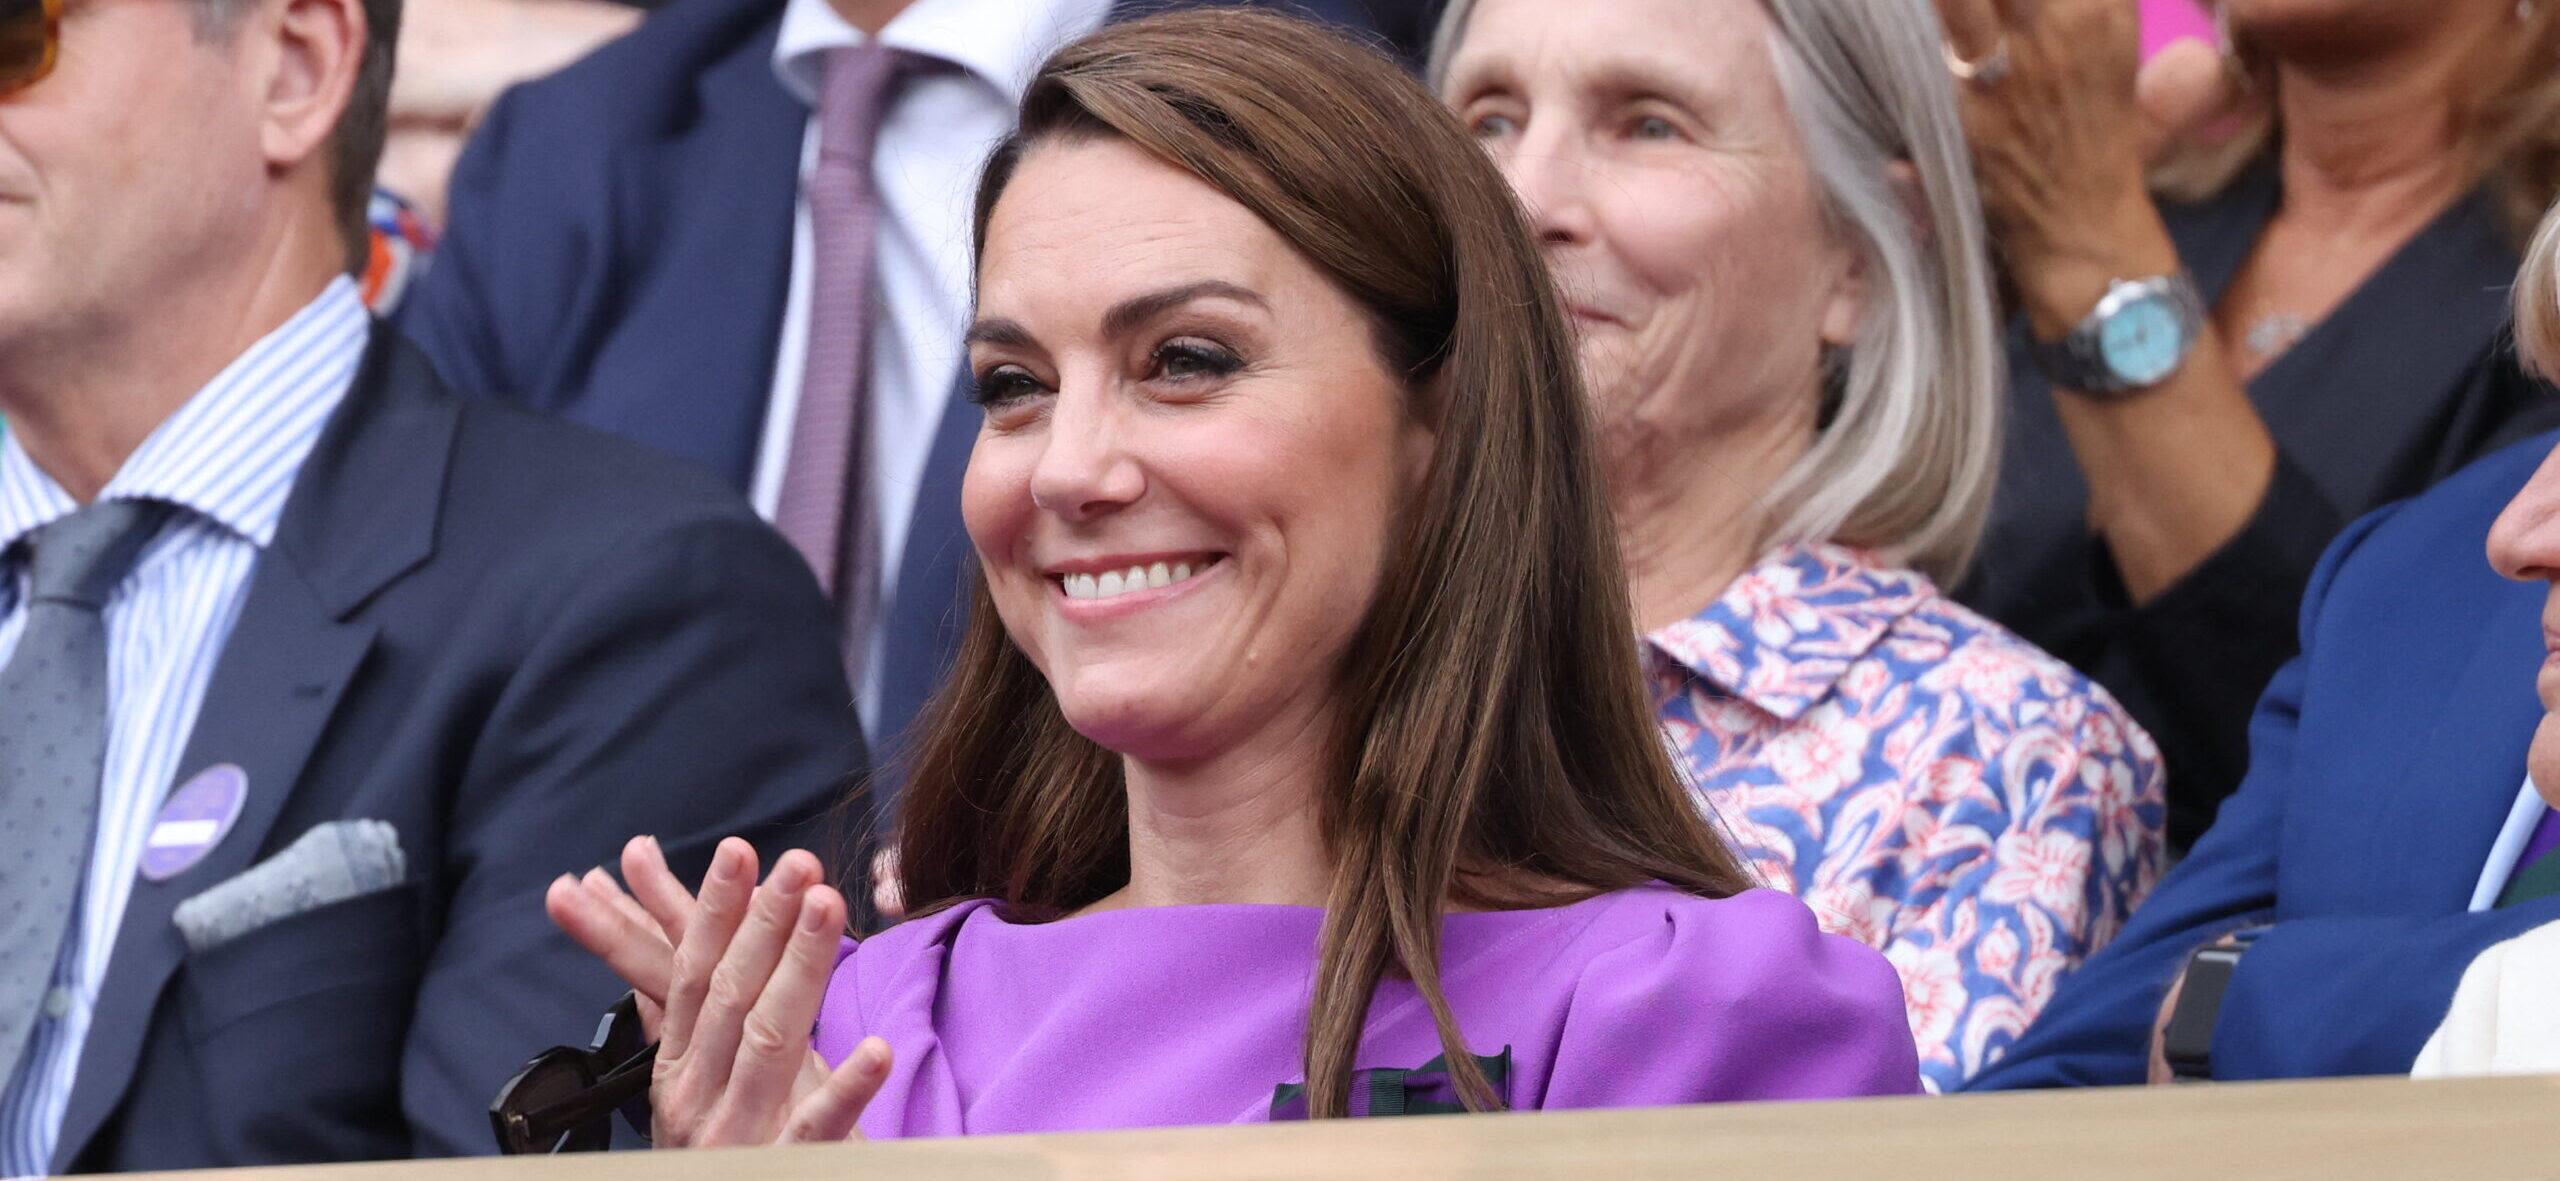 The Princess Of Wales, Kate's Wimbledon Trophy Presentation Delights Many Amid Cancer Battle